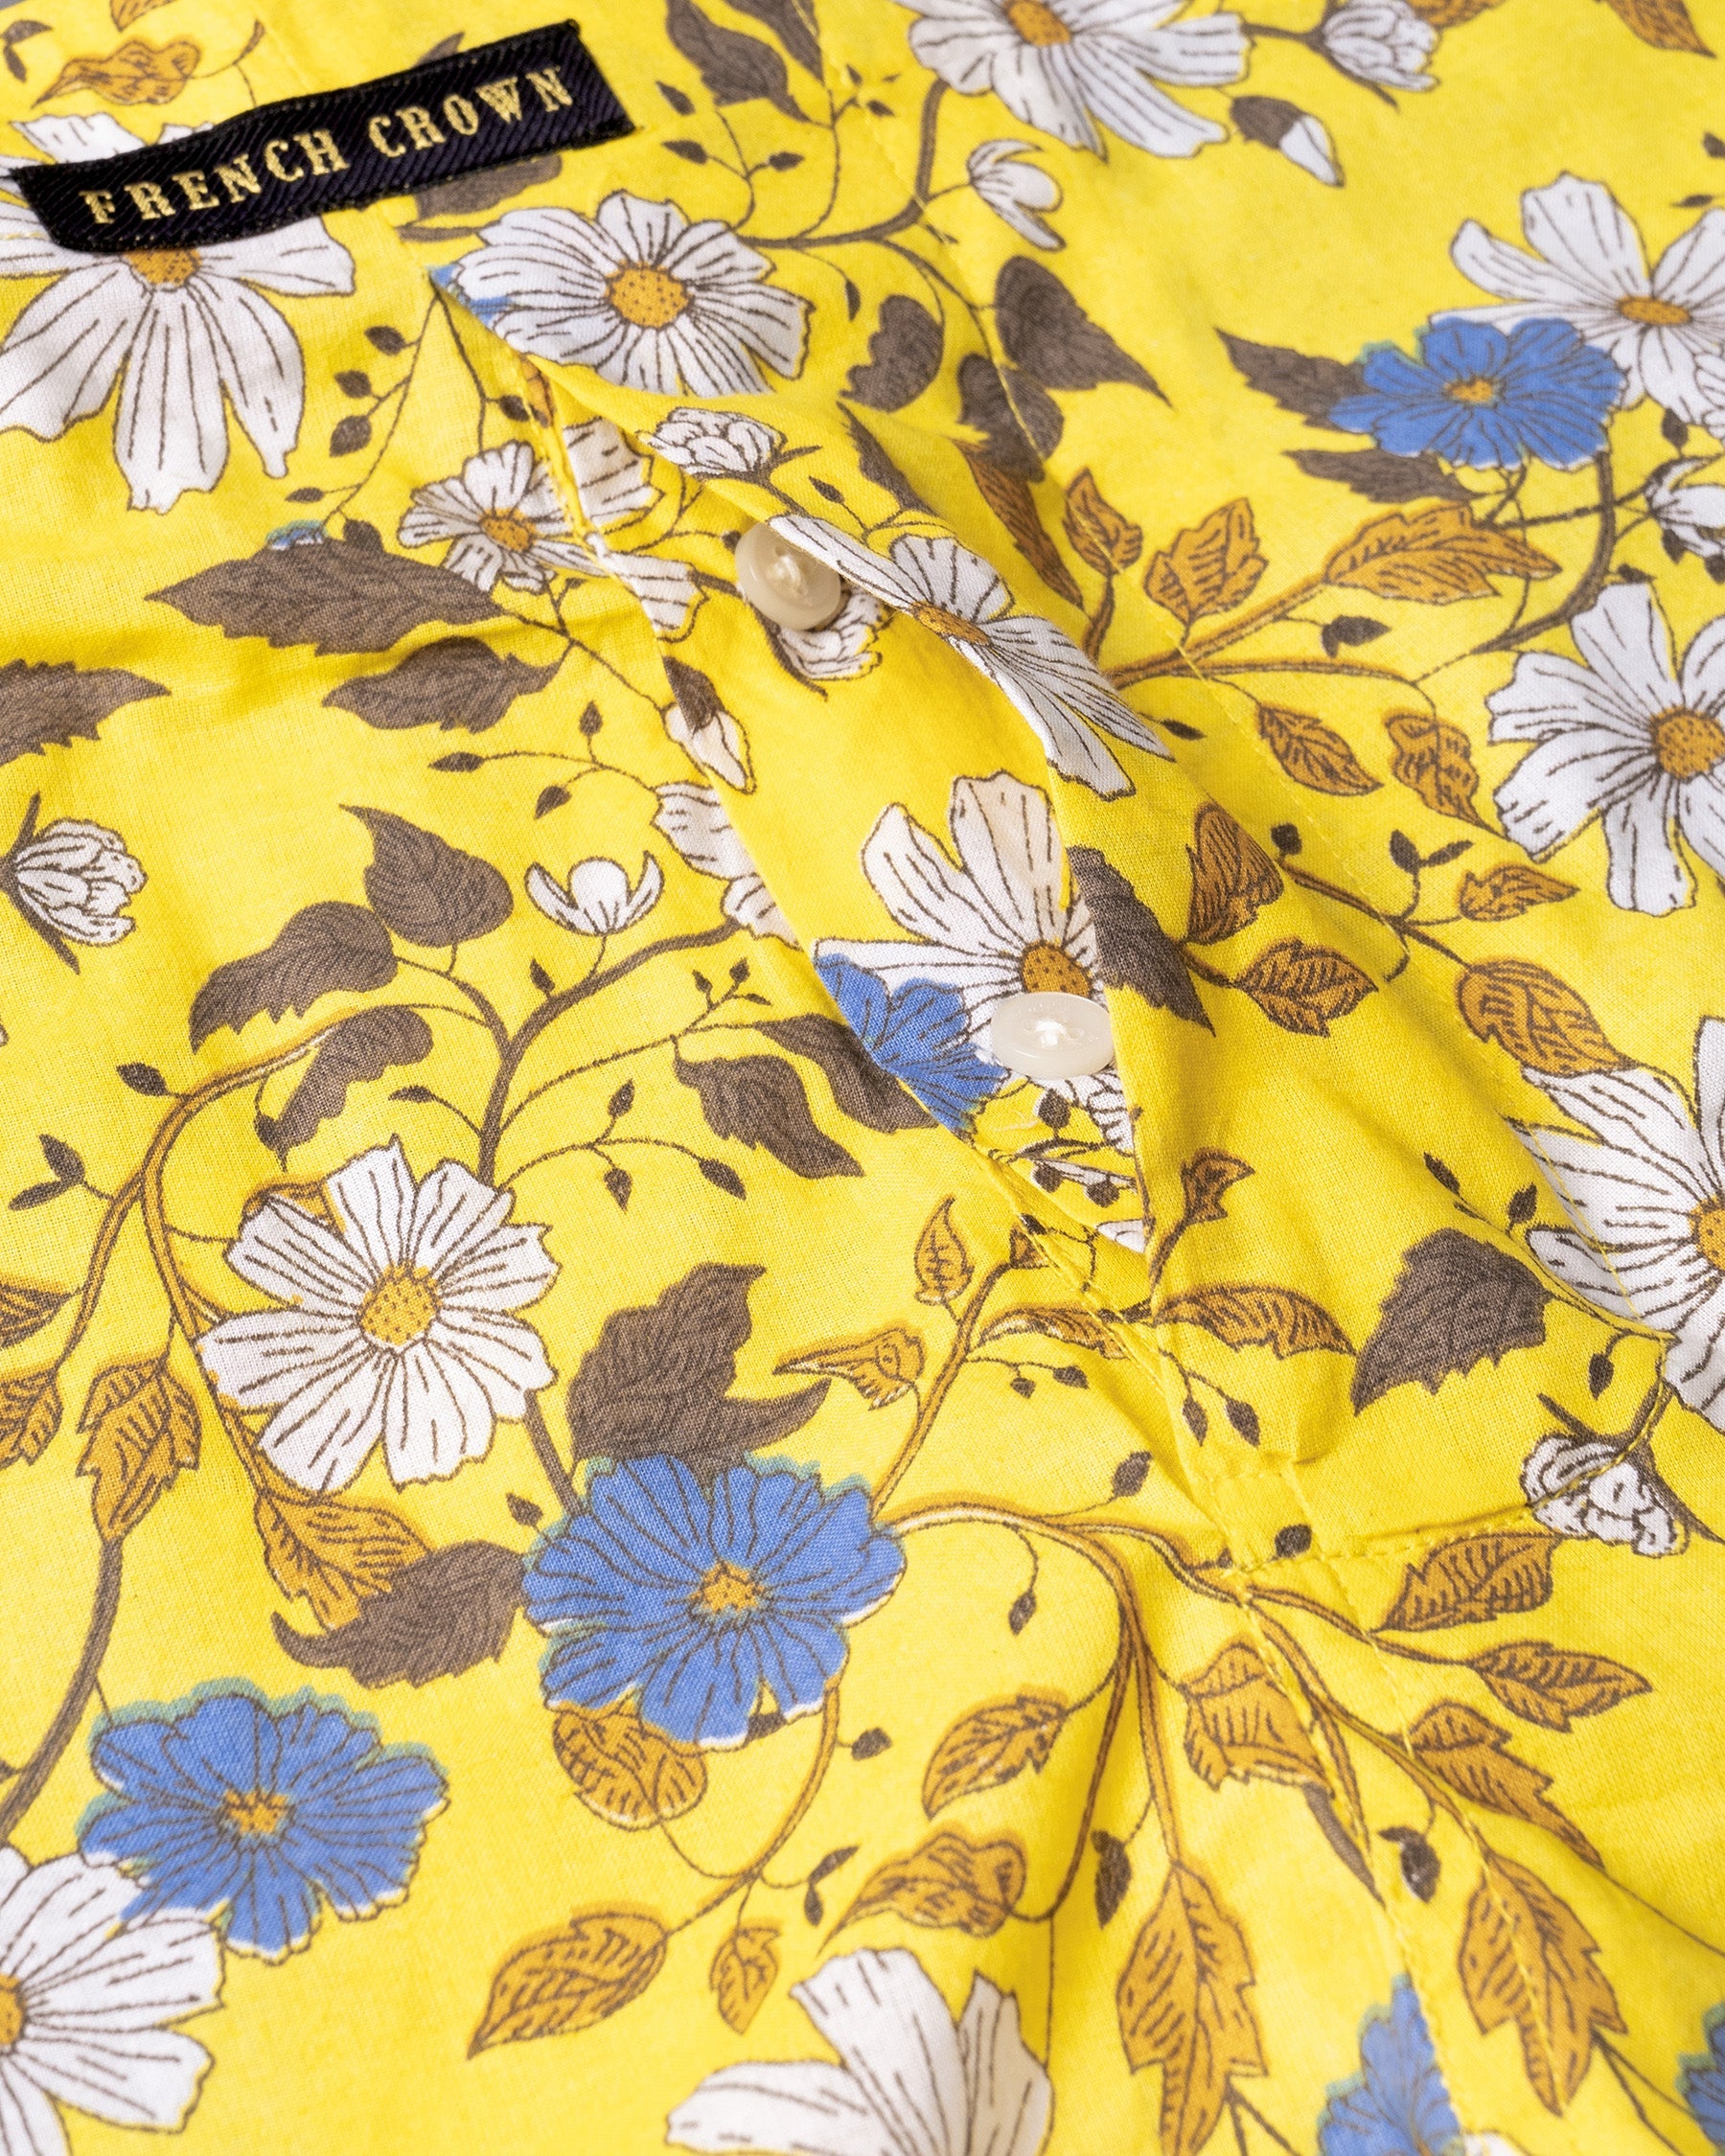 Gorse Yellow Flowers Printed and Cupid Printed Premium Cotton Boxers CBX385-28, CBX385-30, CBX385-32, CBX385-34, CBX385-36, CBX385-38, CBX385-40, CBX385-42, CBX385-44